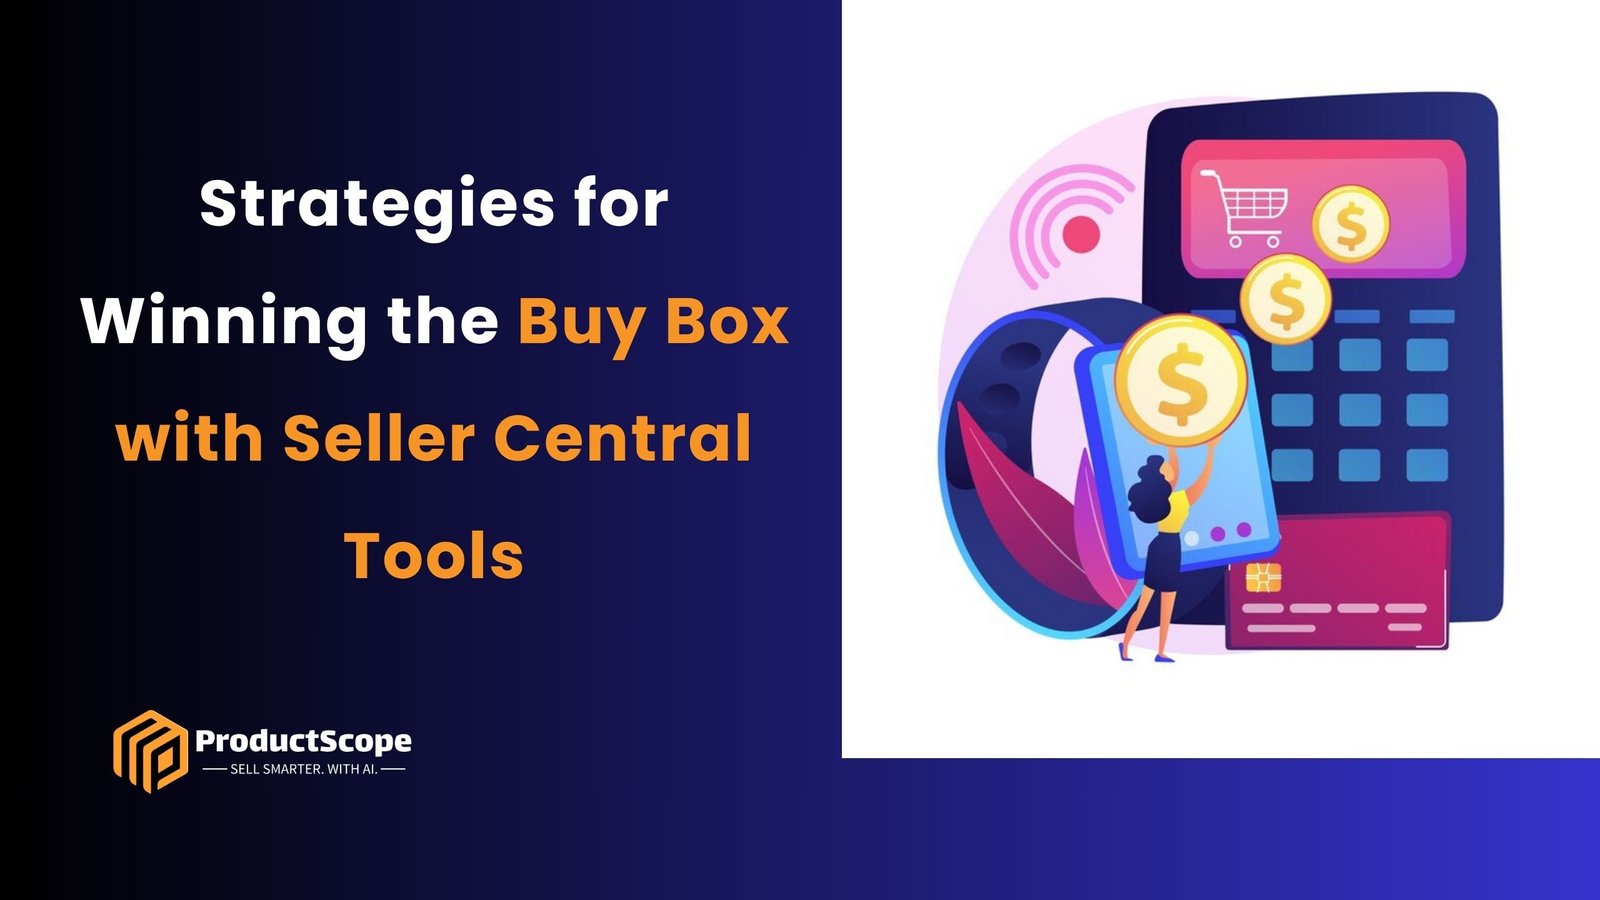 Strategies for Winning the Buy Box with Seller Central Tools